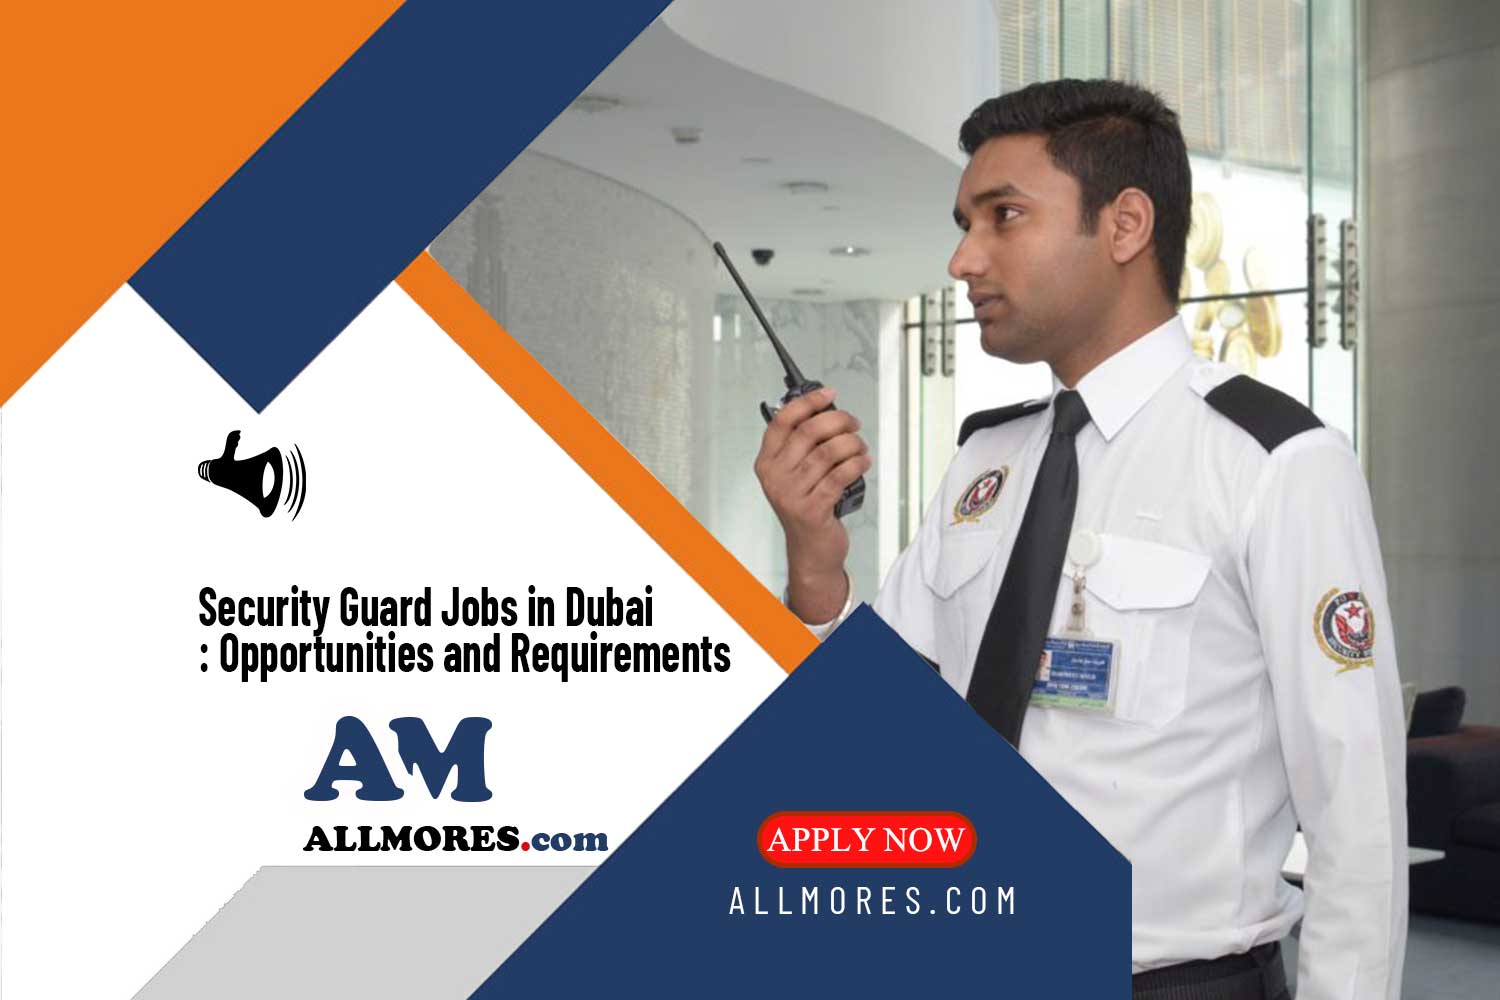 Security Guard Jobs in Dubai: Opportunities and Requirements